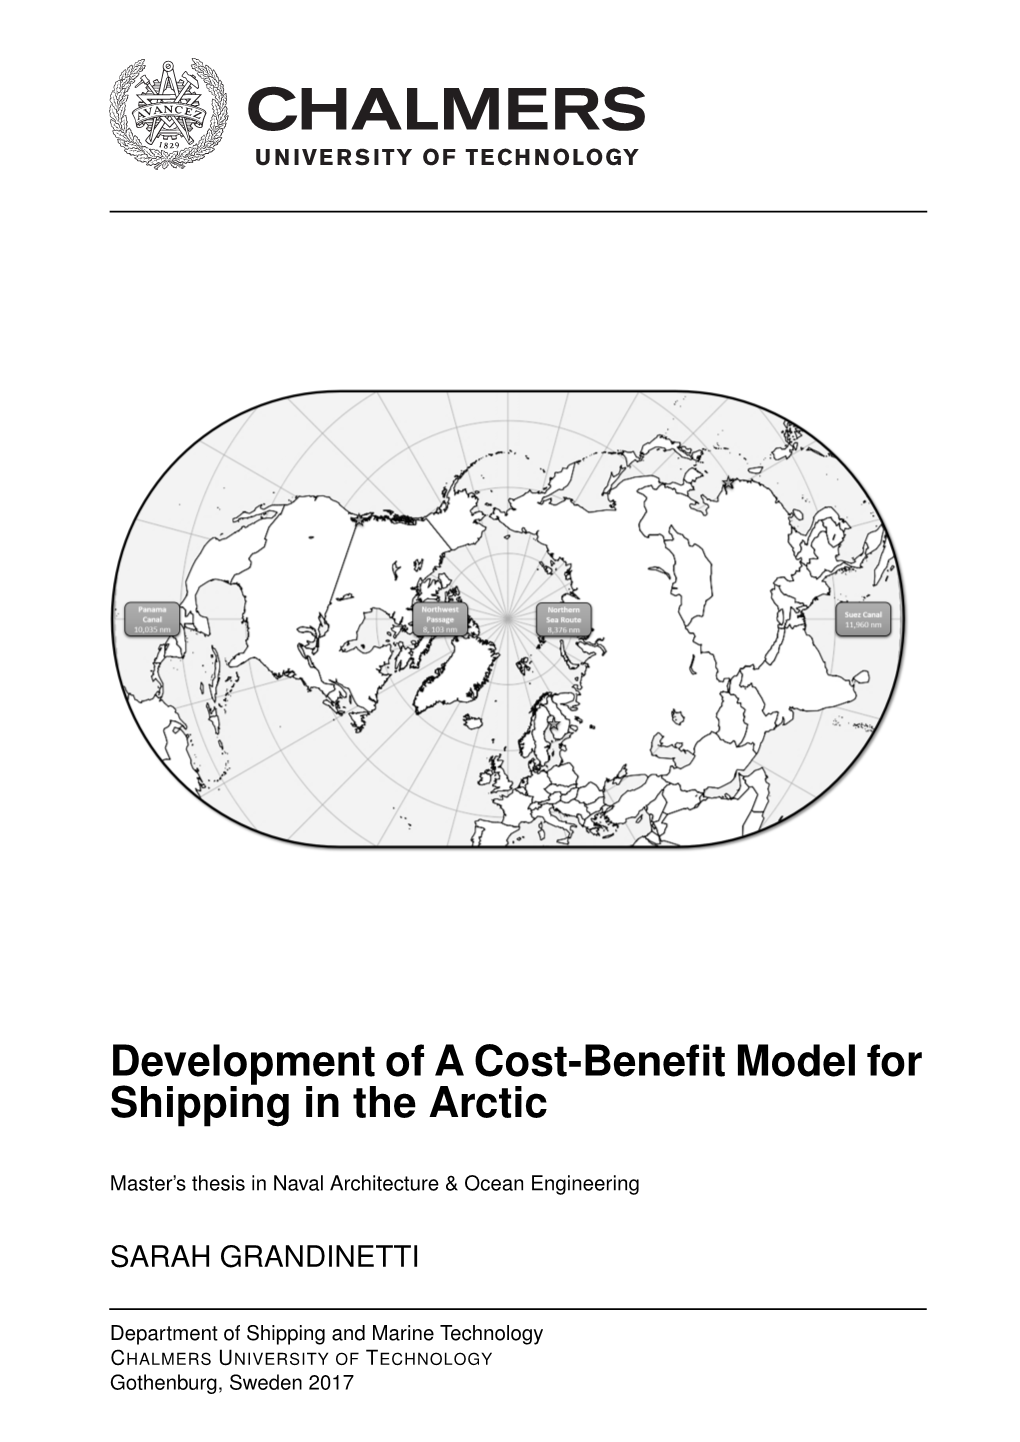 Development of a Cost-Benefit Model for Shipping in the Arctic